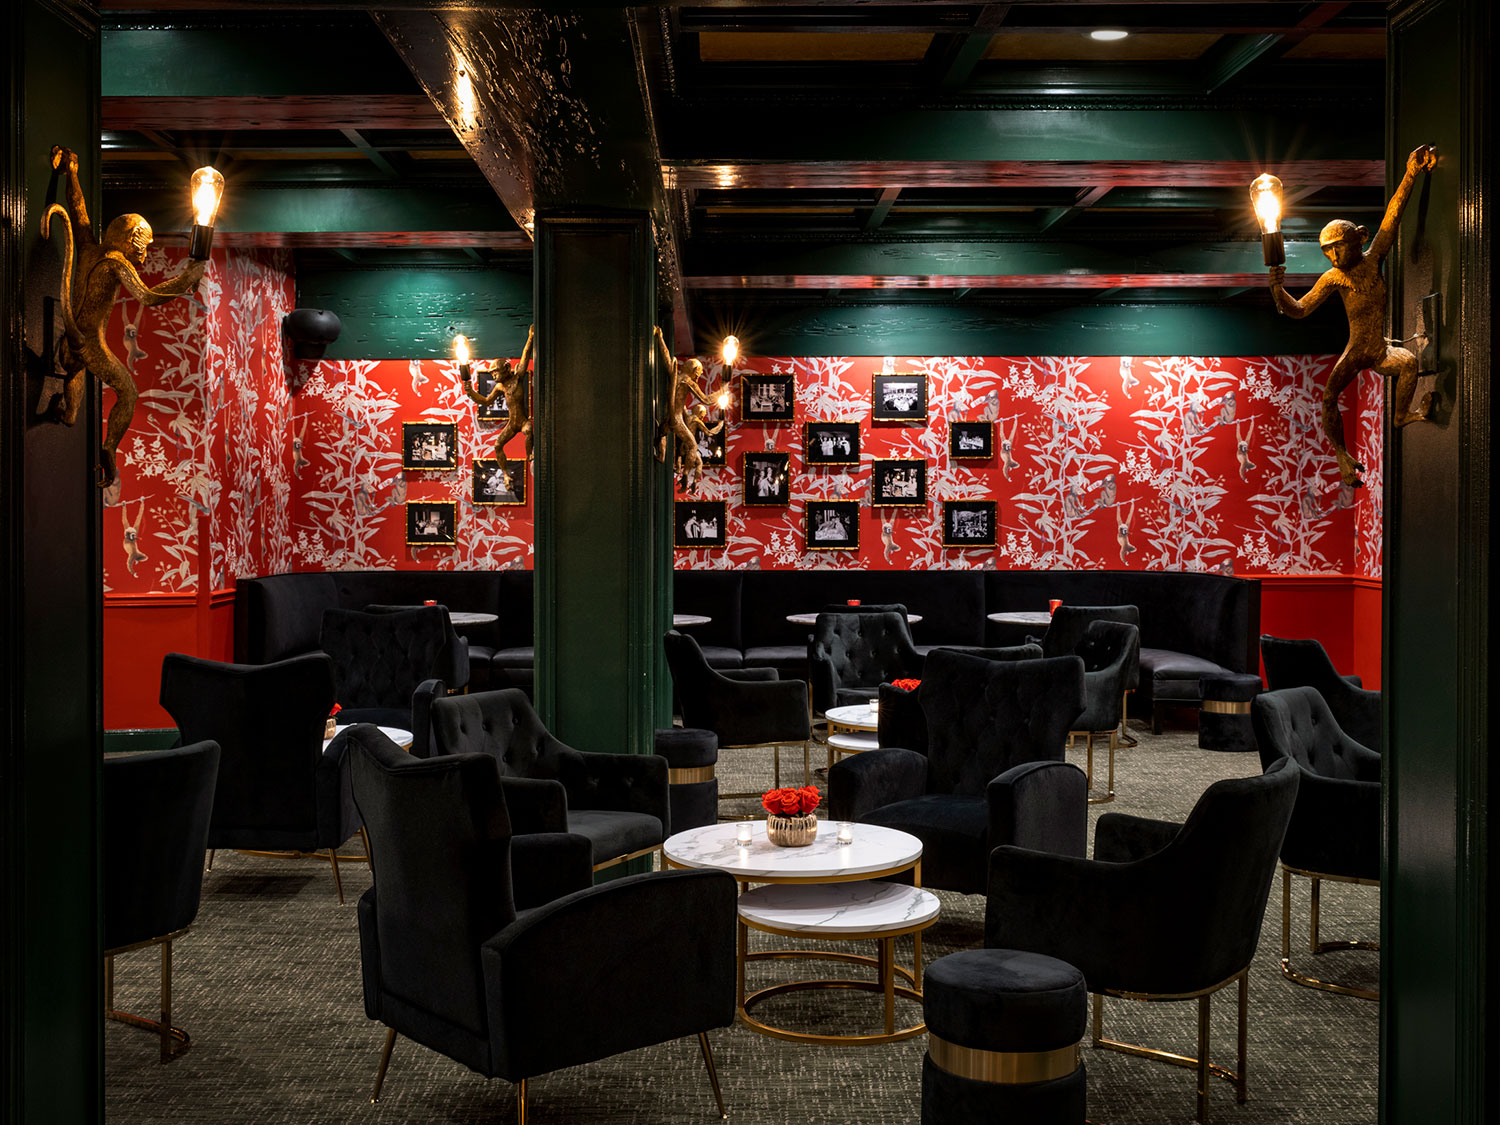 The unique red and black interior of MB Supper Club at The Boca Raton